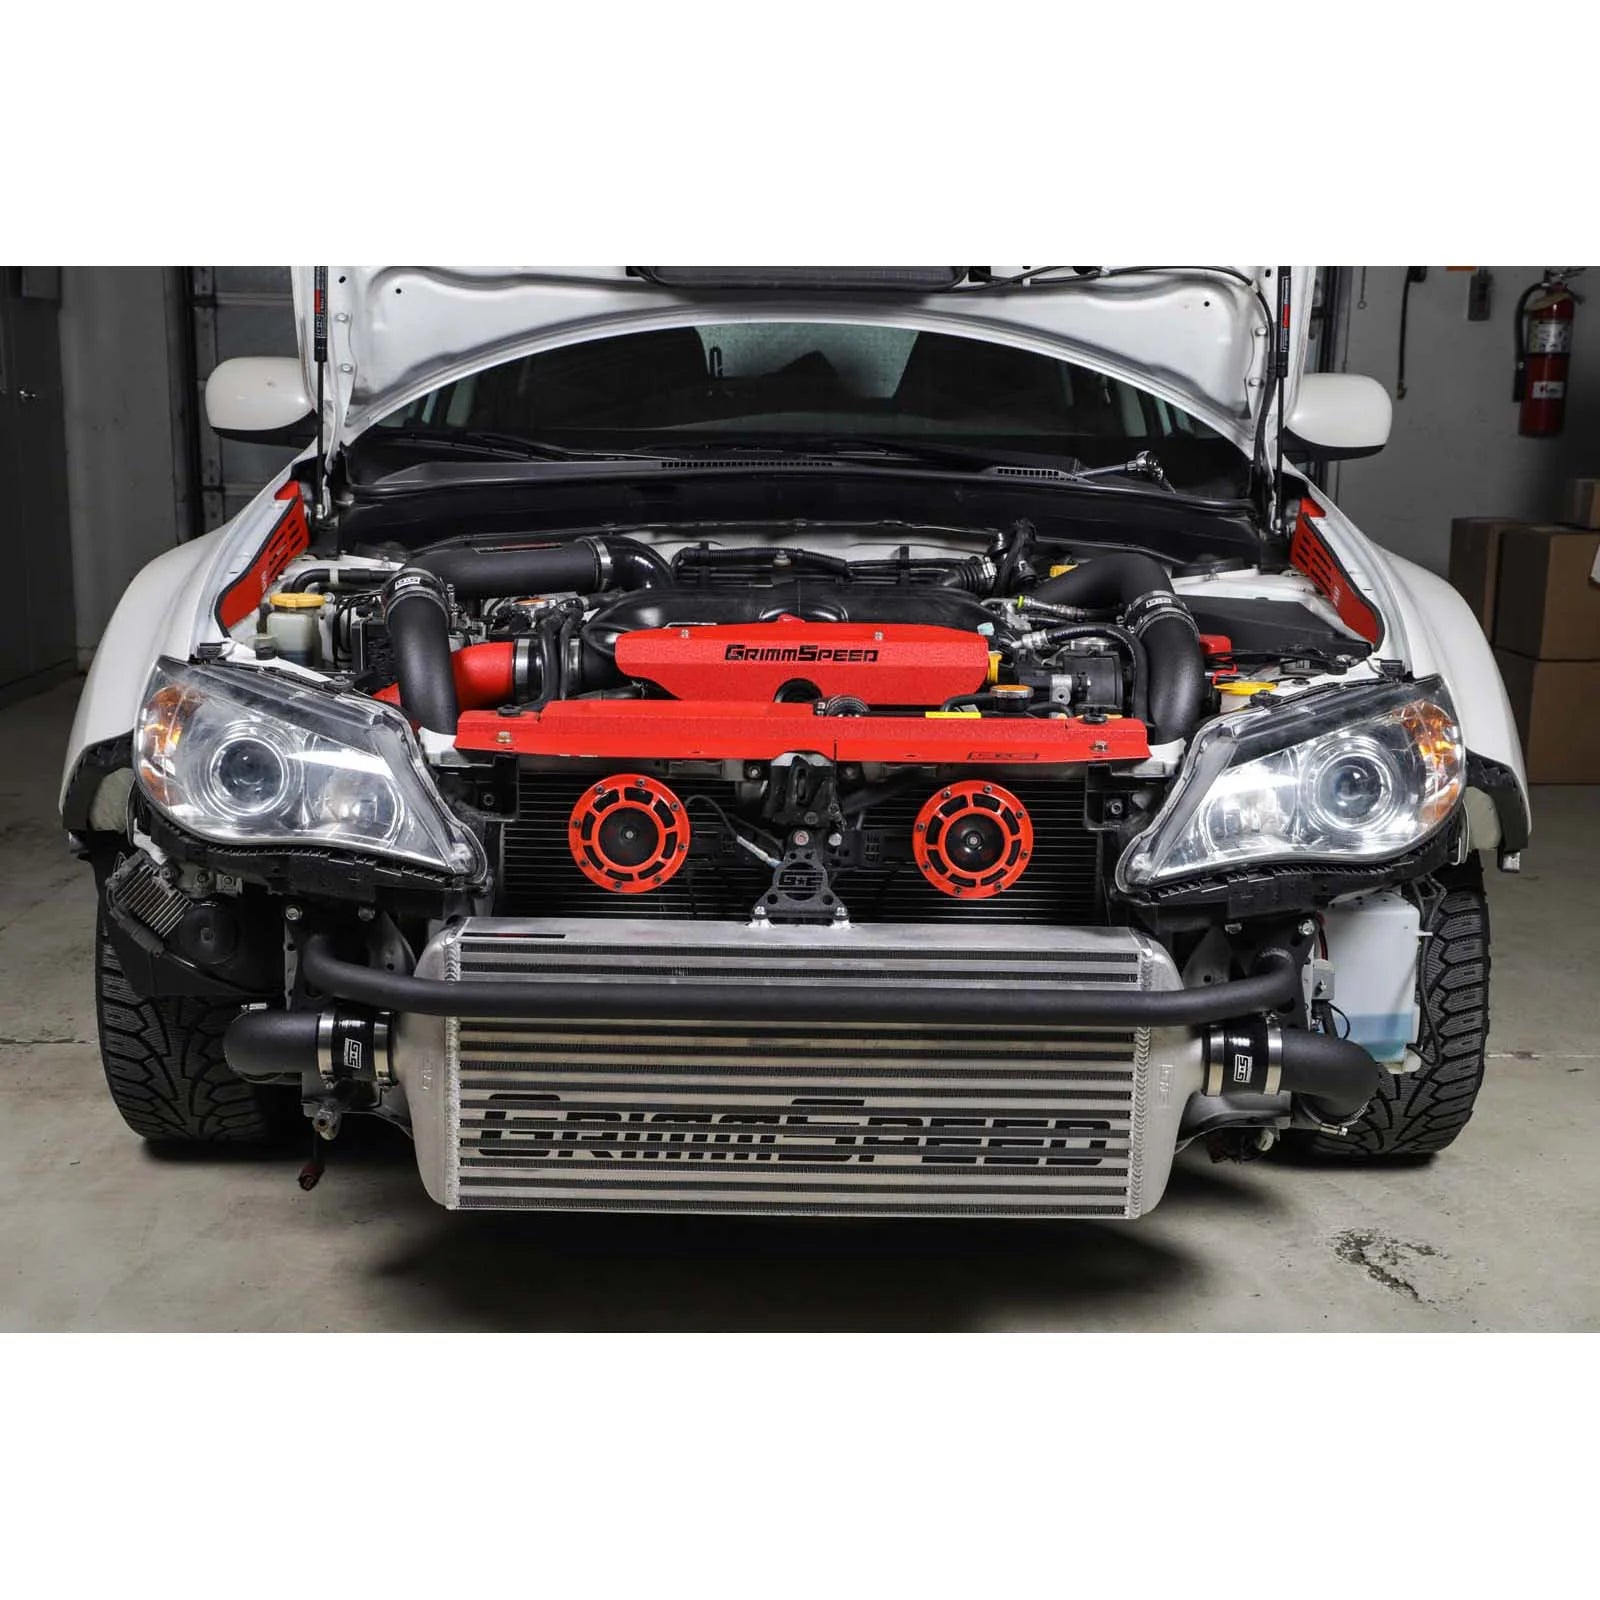 GrimmSpeed Front Mount Intercooler Kit - Raw Core with Black Piping - 2008-14 Subaru WRX - 0